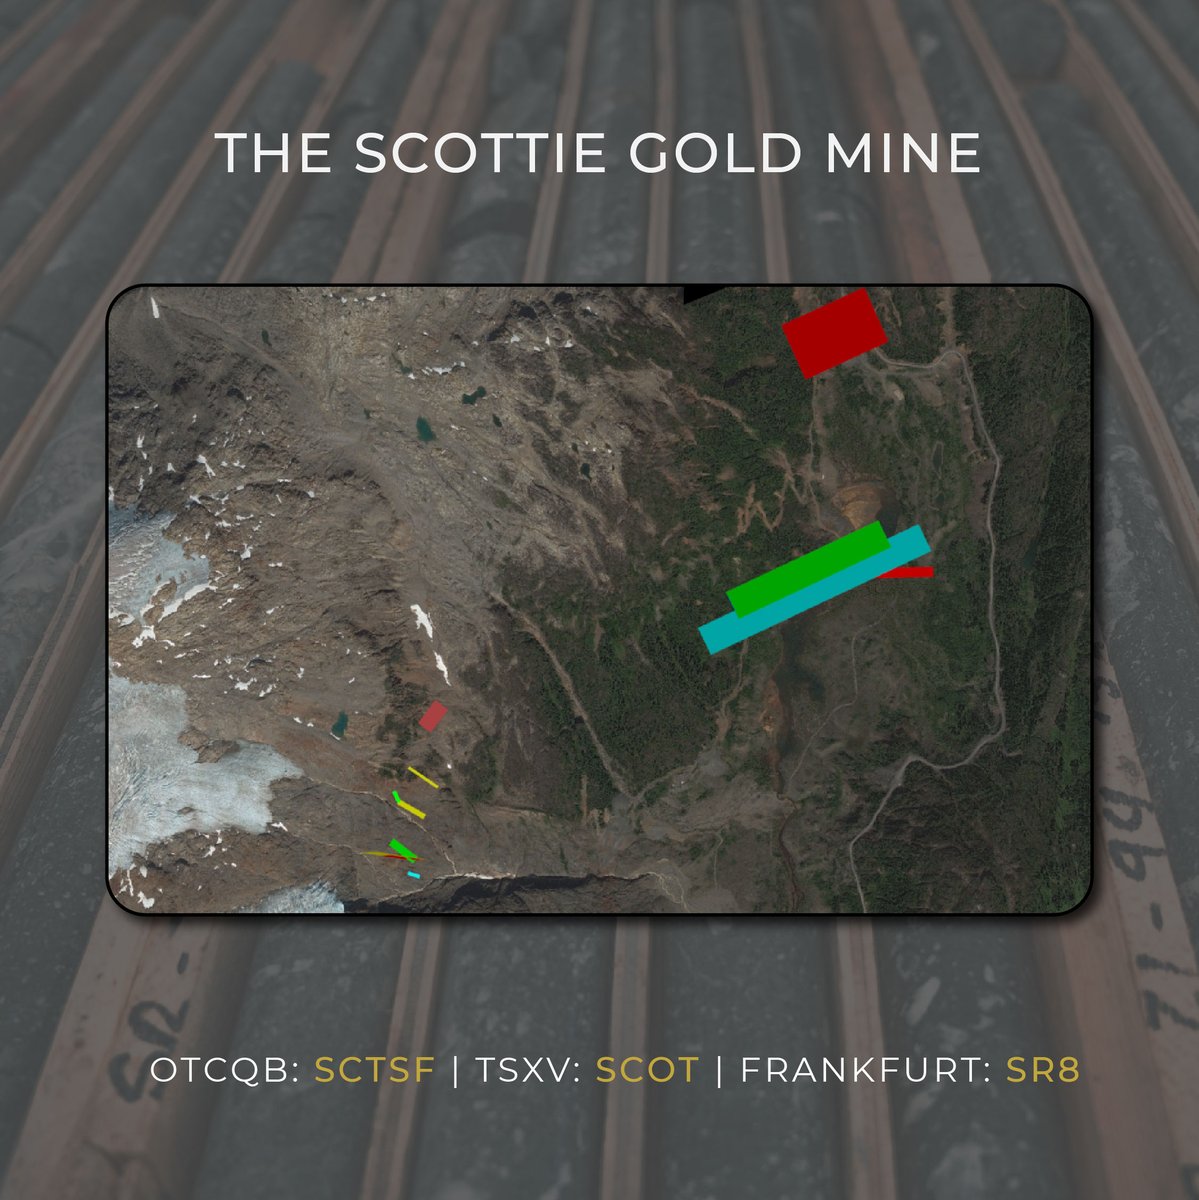 🔎 Past-producing #gold mine with remaining mine life
🔎 2022 geophysical surveys revealed areas of high conductivity
🔎 Plate modeling shows refined anomalies that provide discrete high-confidence drill targets for 2023

$SCOT #tsxv #octqb #mining #investment #preciousmetals